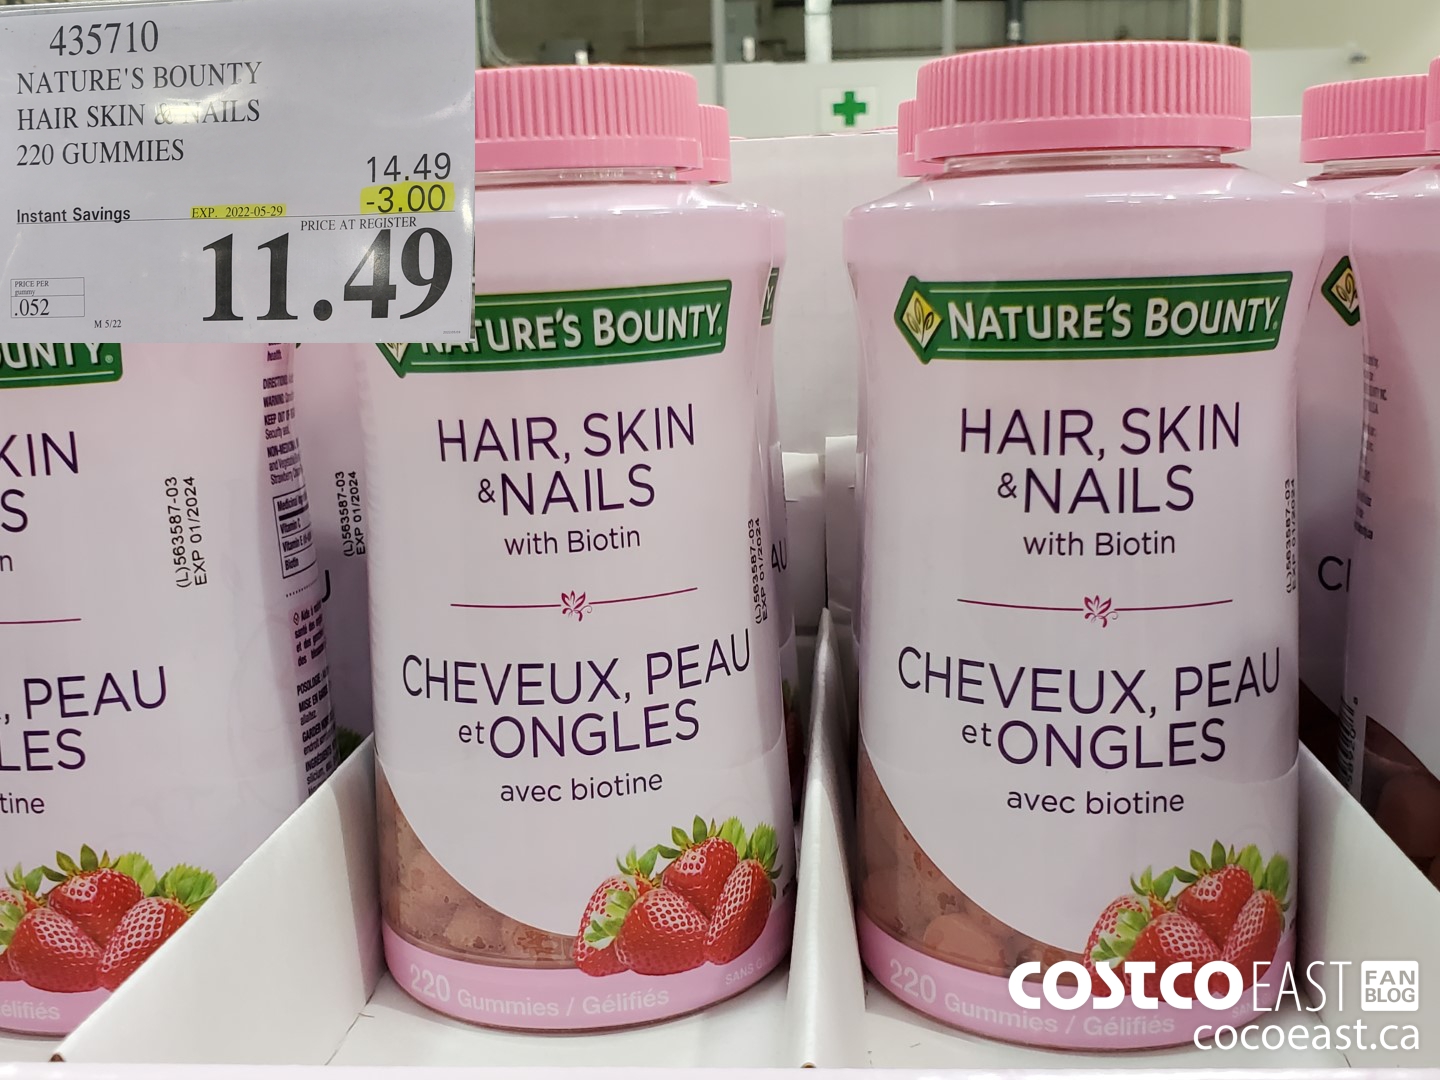 435710 NATURE S BOUNTY HAIR SKIN NAILS 220 GUMMIES 3 00 INSTANT SAVINGS  EXPIRES ON 2022 05 29 11 49 - Costco East Fan Blog